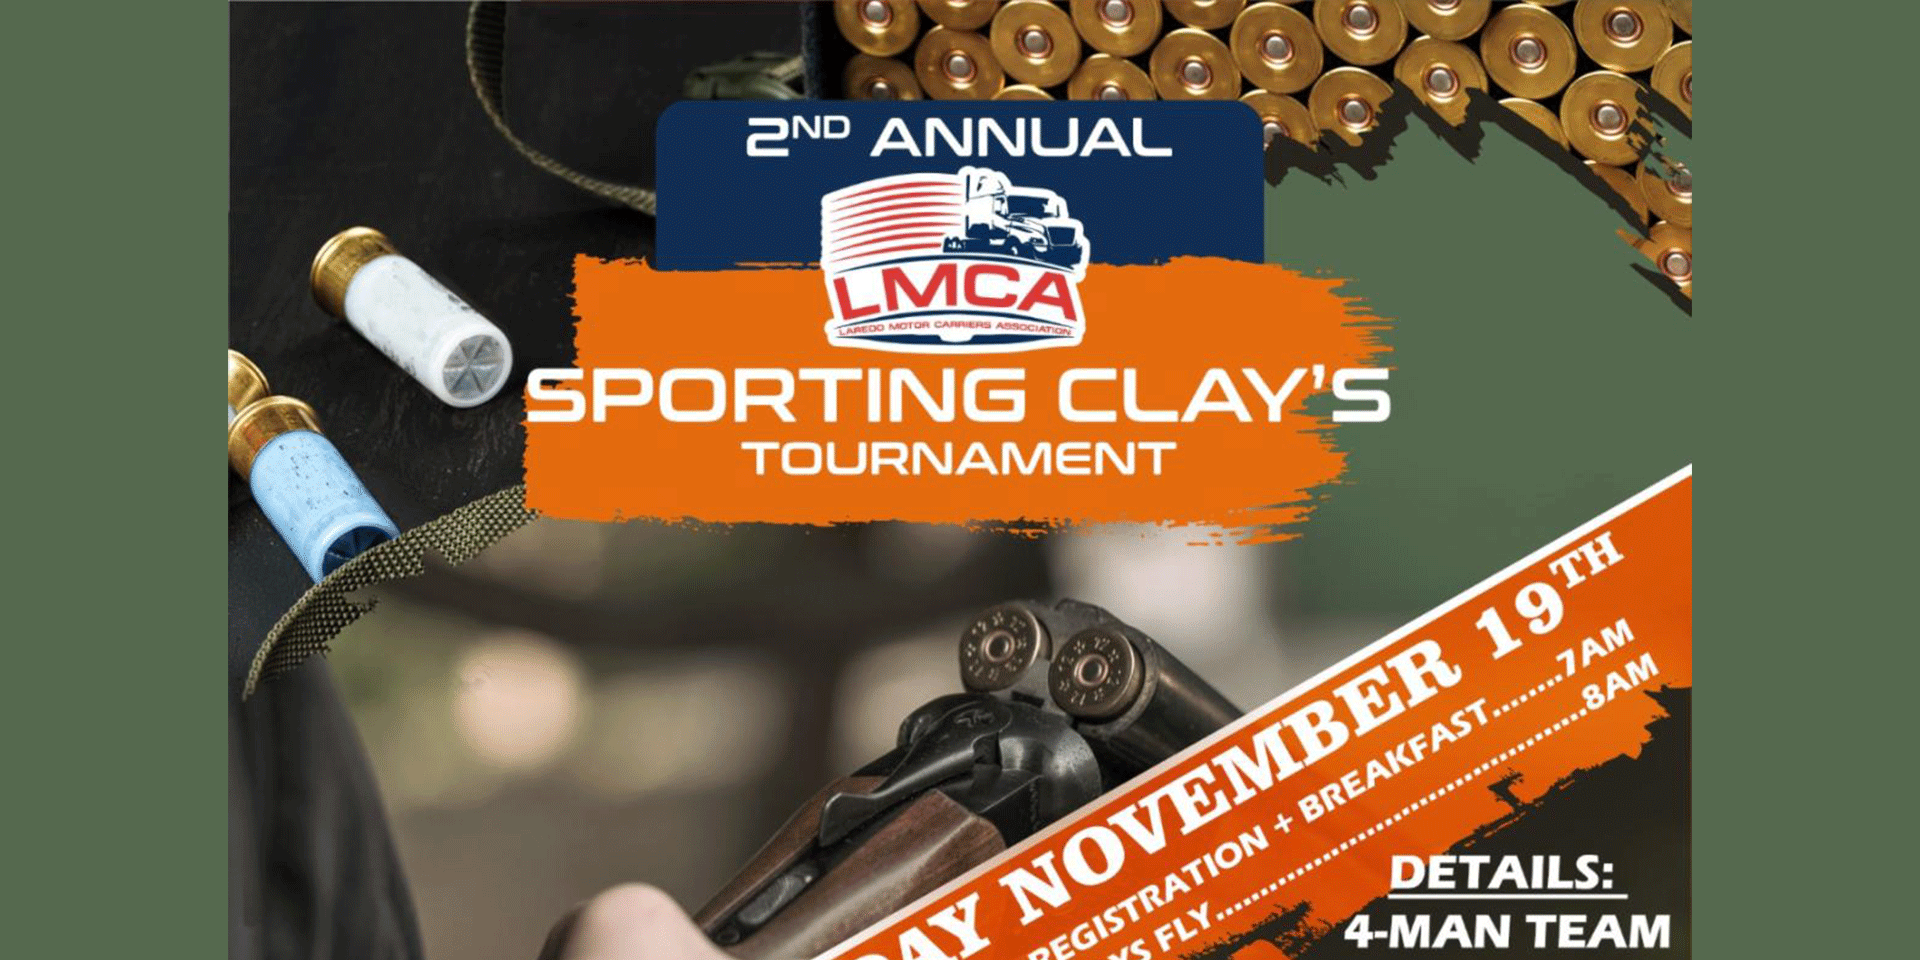 LMCA’S 2ND ANNUAL SPORTING CLAYS TOURNAMENT